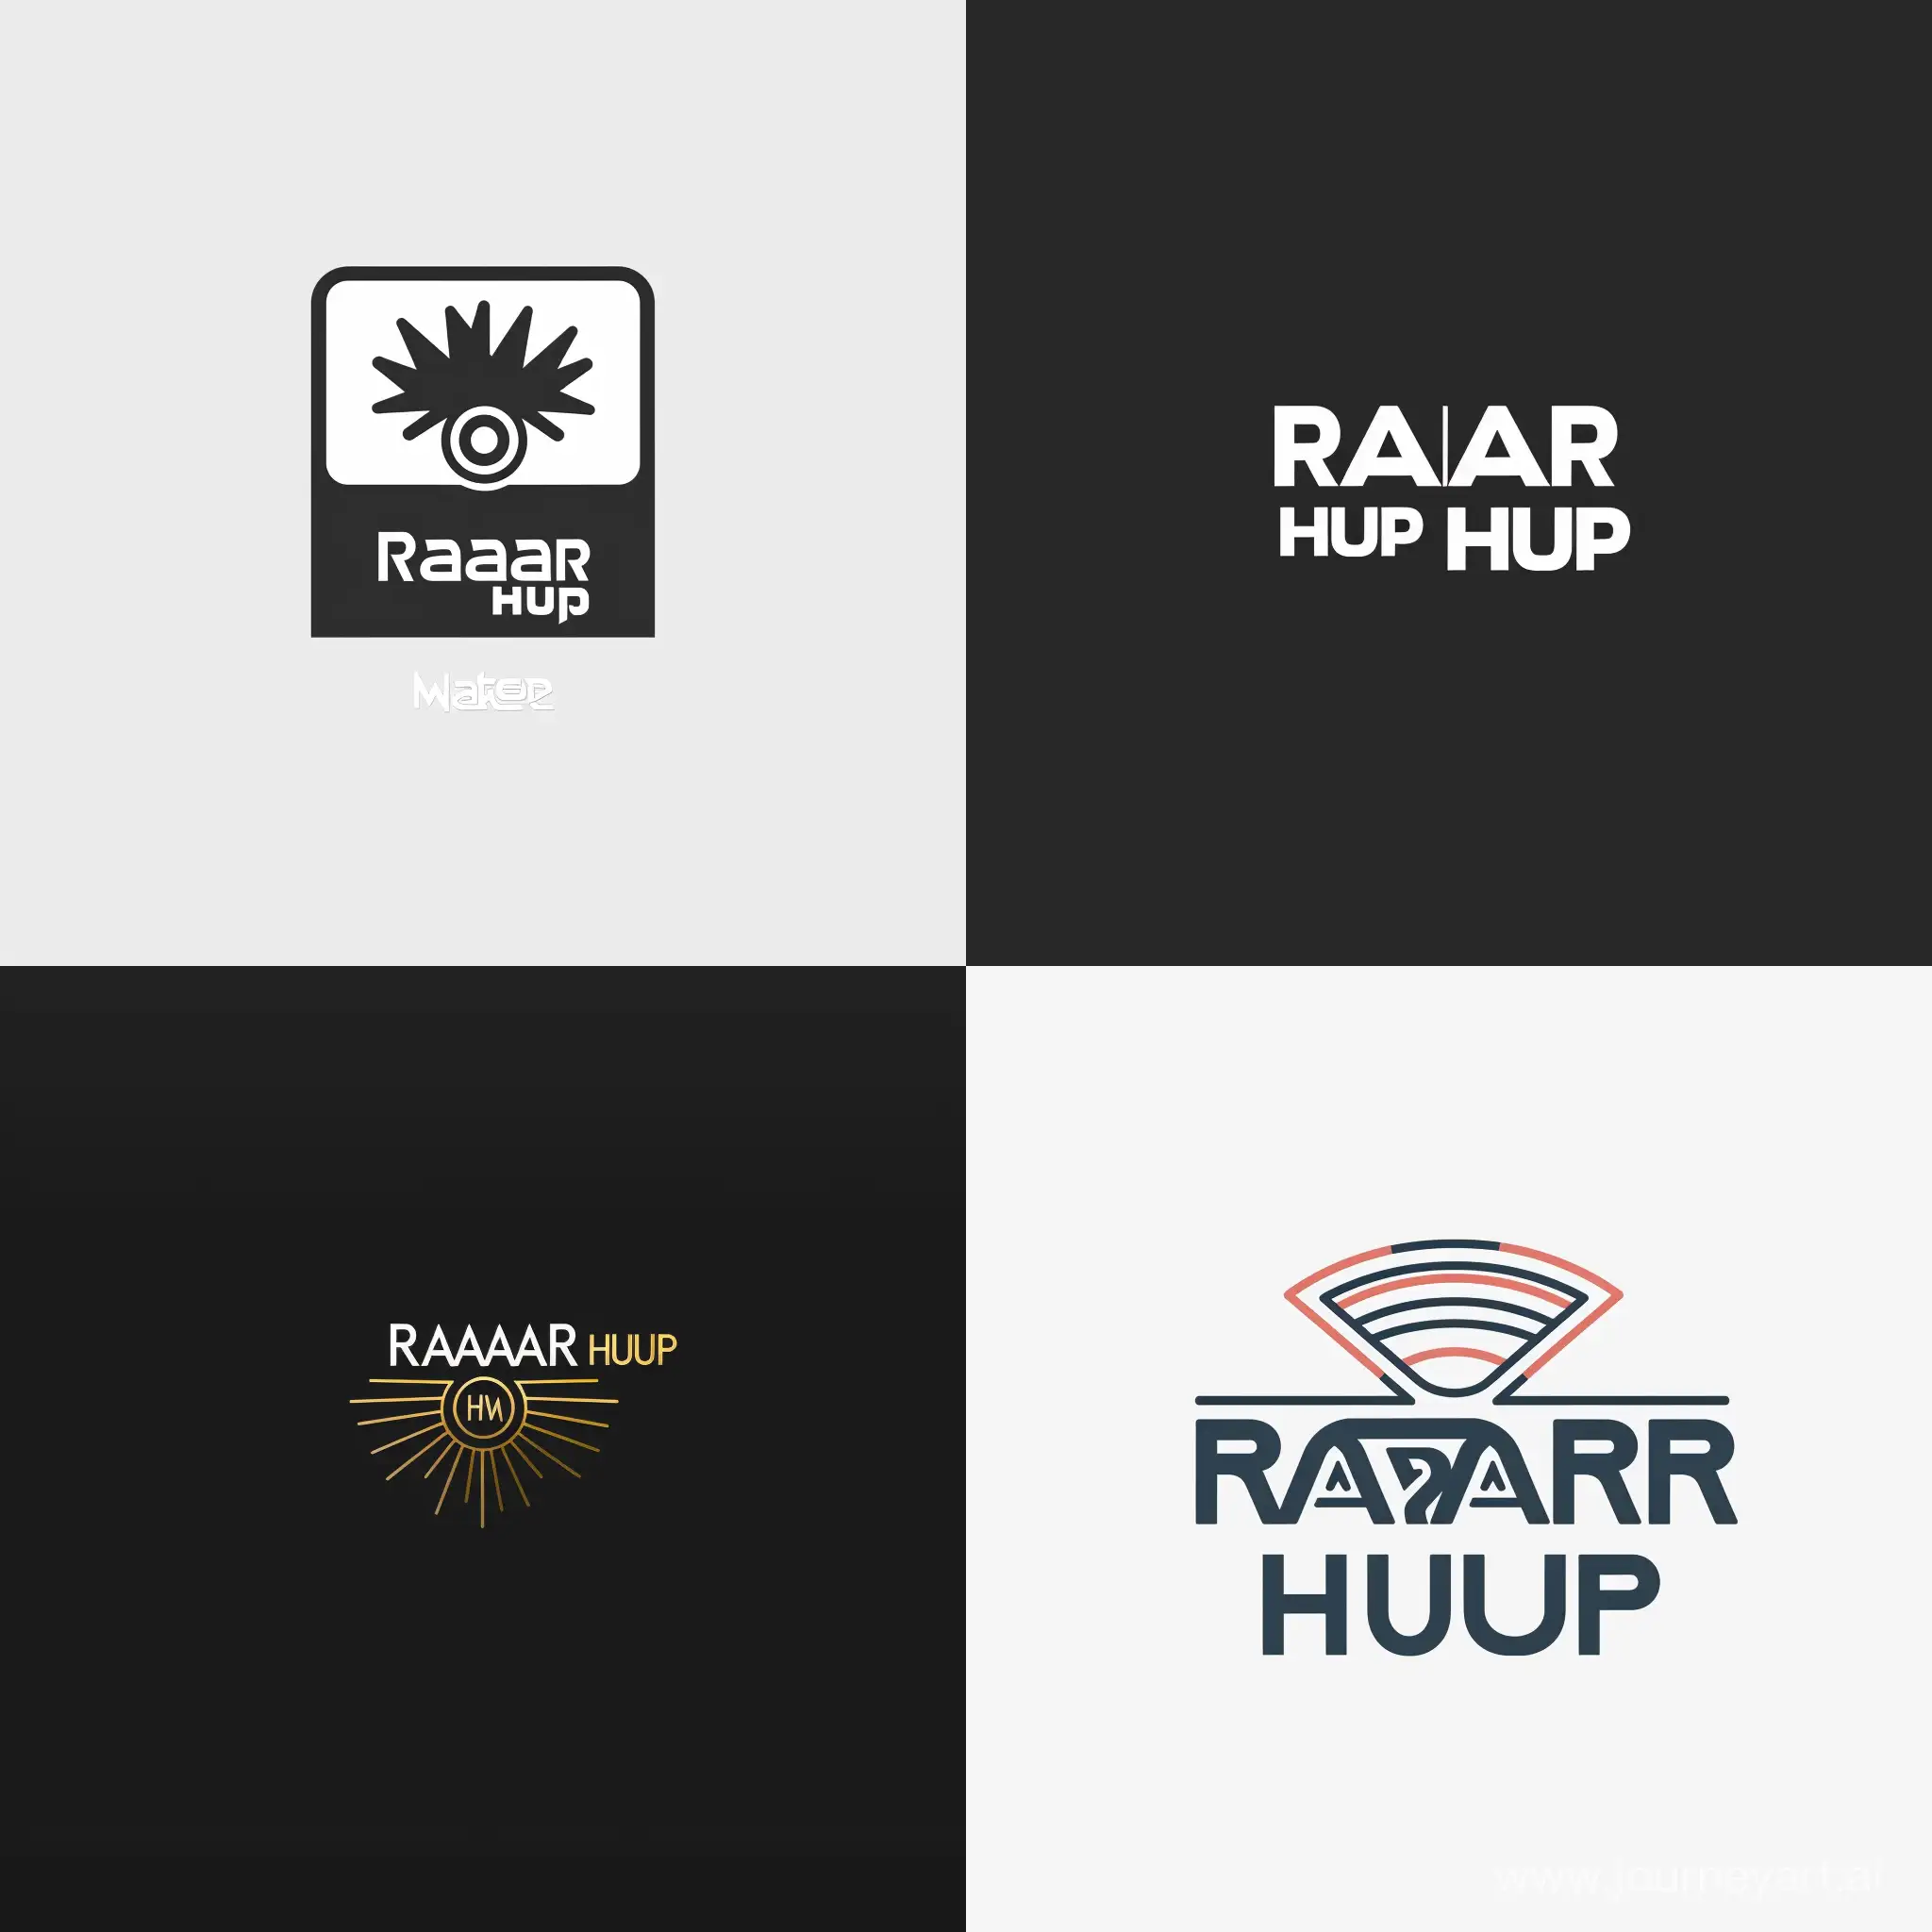 Generate a logo for a news aggregator website that aggregates different types of content like video, blog, news. The name of the website is Radar Hub. The logo should be minimal, clean and beautiful 